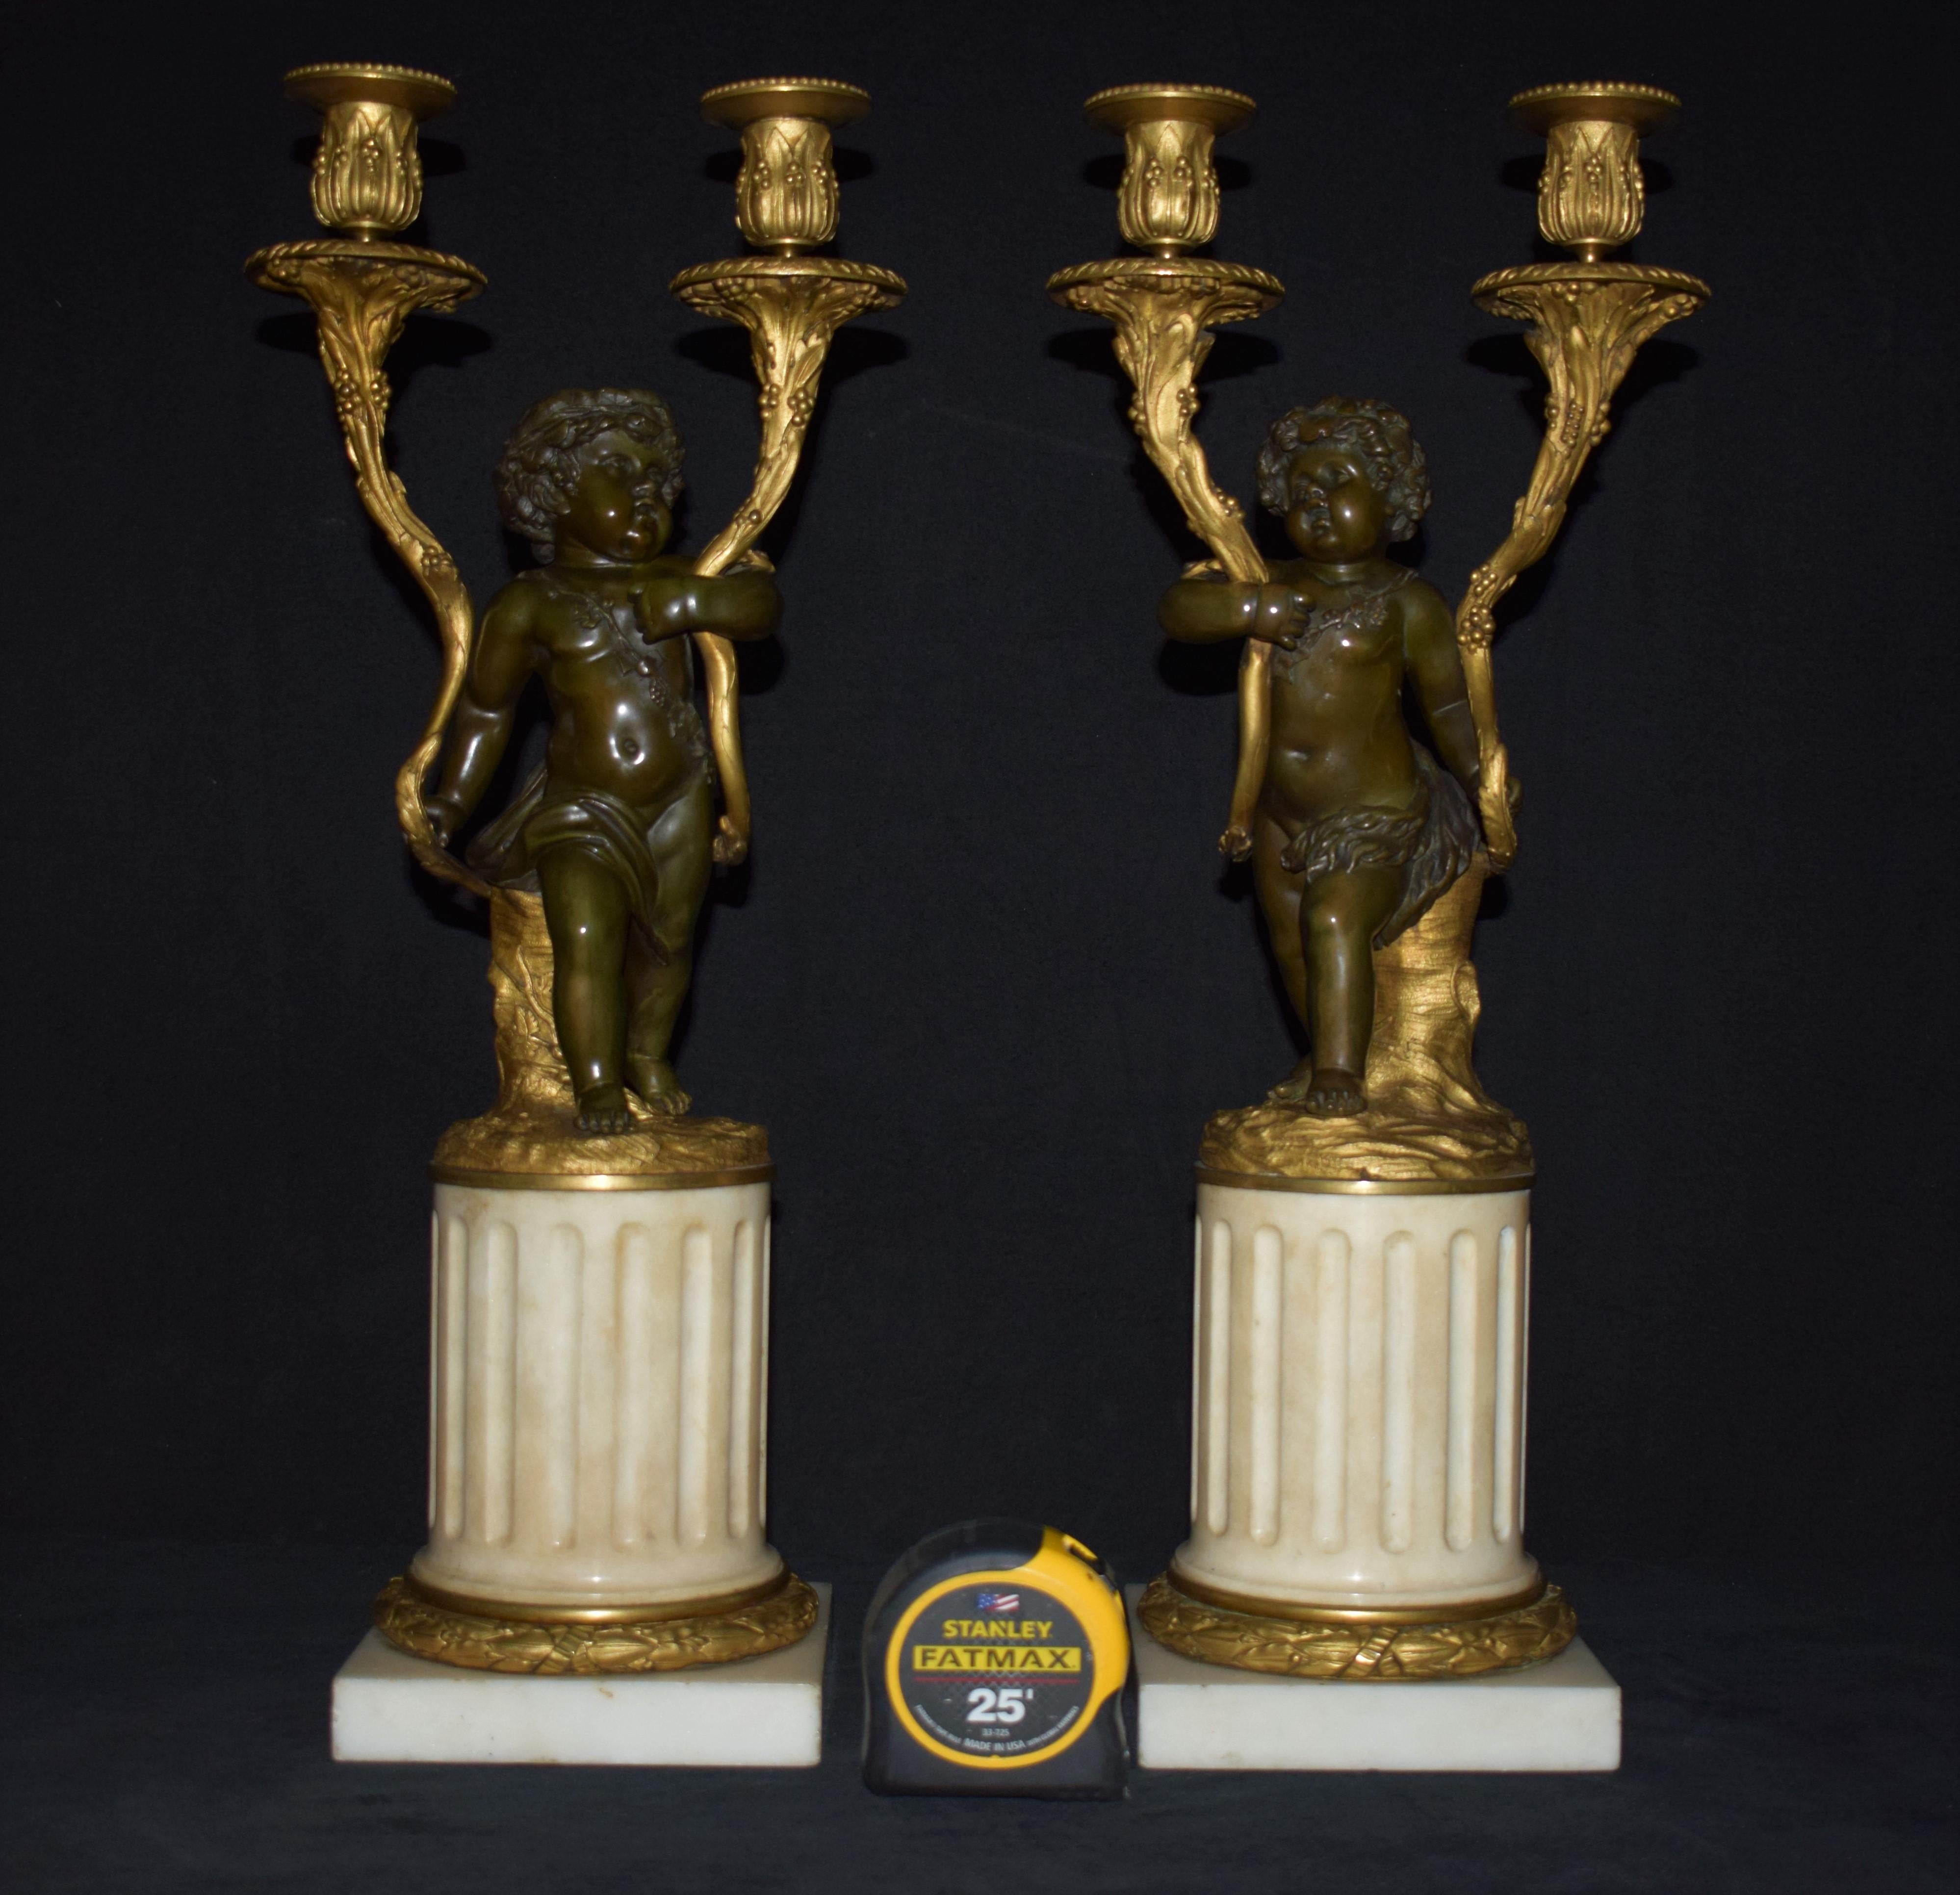 A fine and decorative pair of Louis XVI style parcel-gilt and patinated bronze candelabra. Raised on white marble reeded columns resting on square bases, France, circa 1900
Dimensions: Height 21 inches x 6